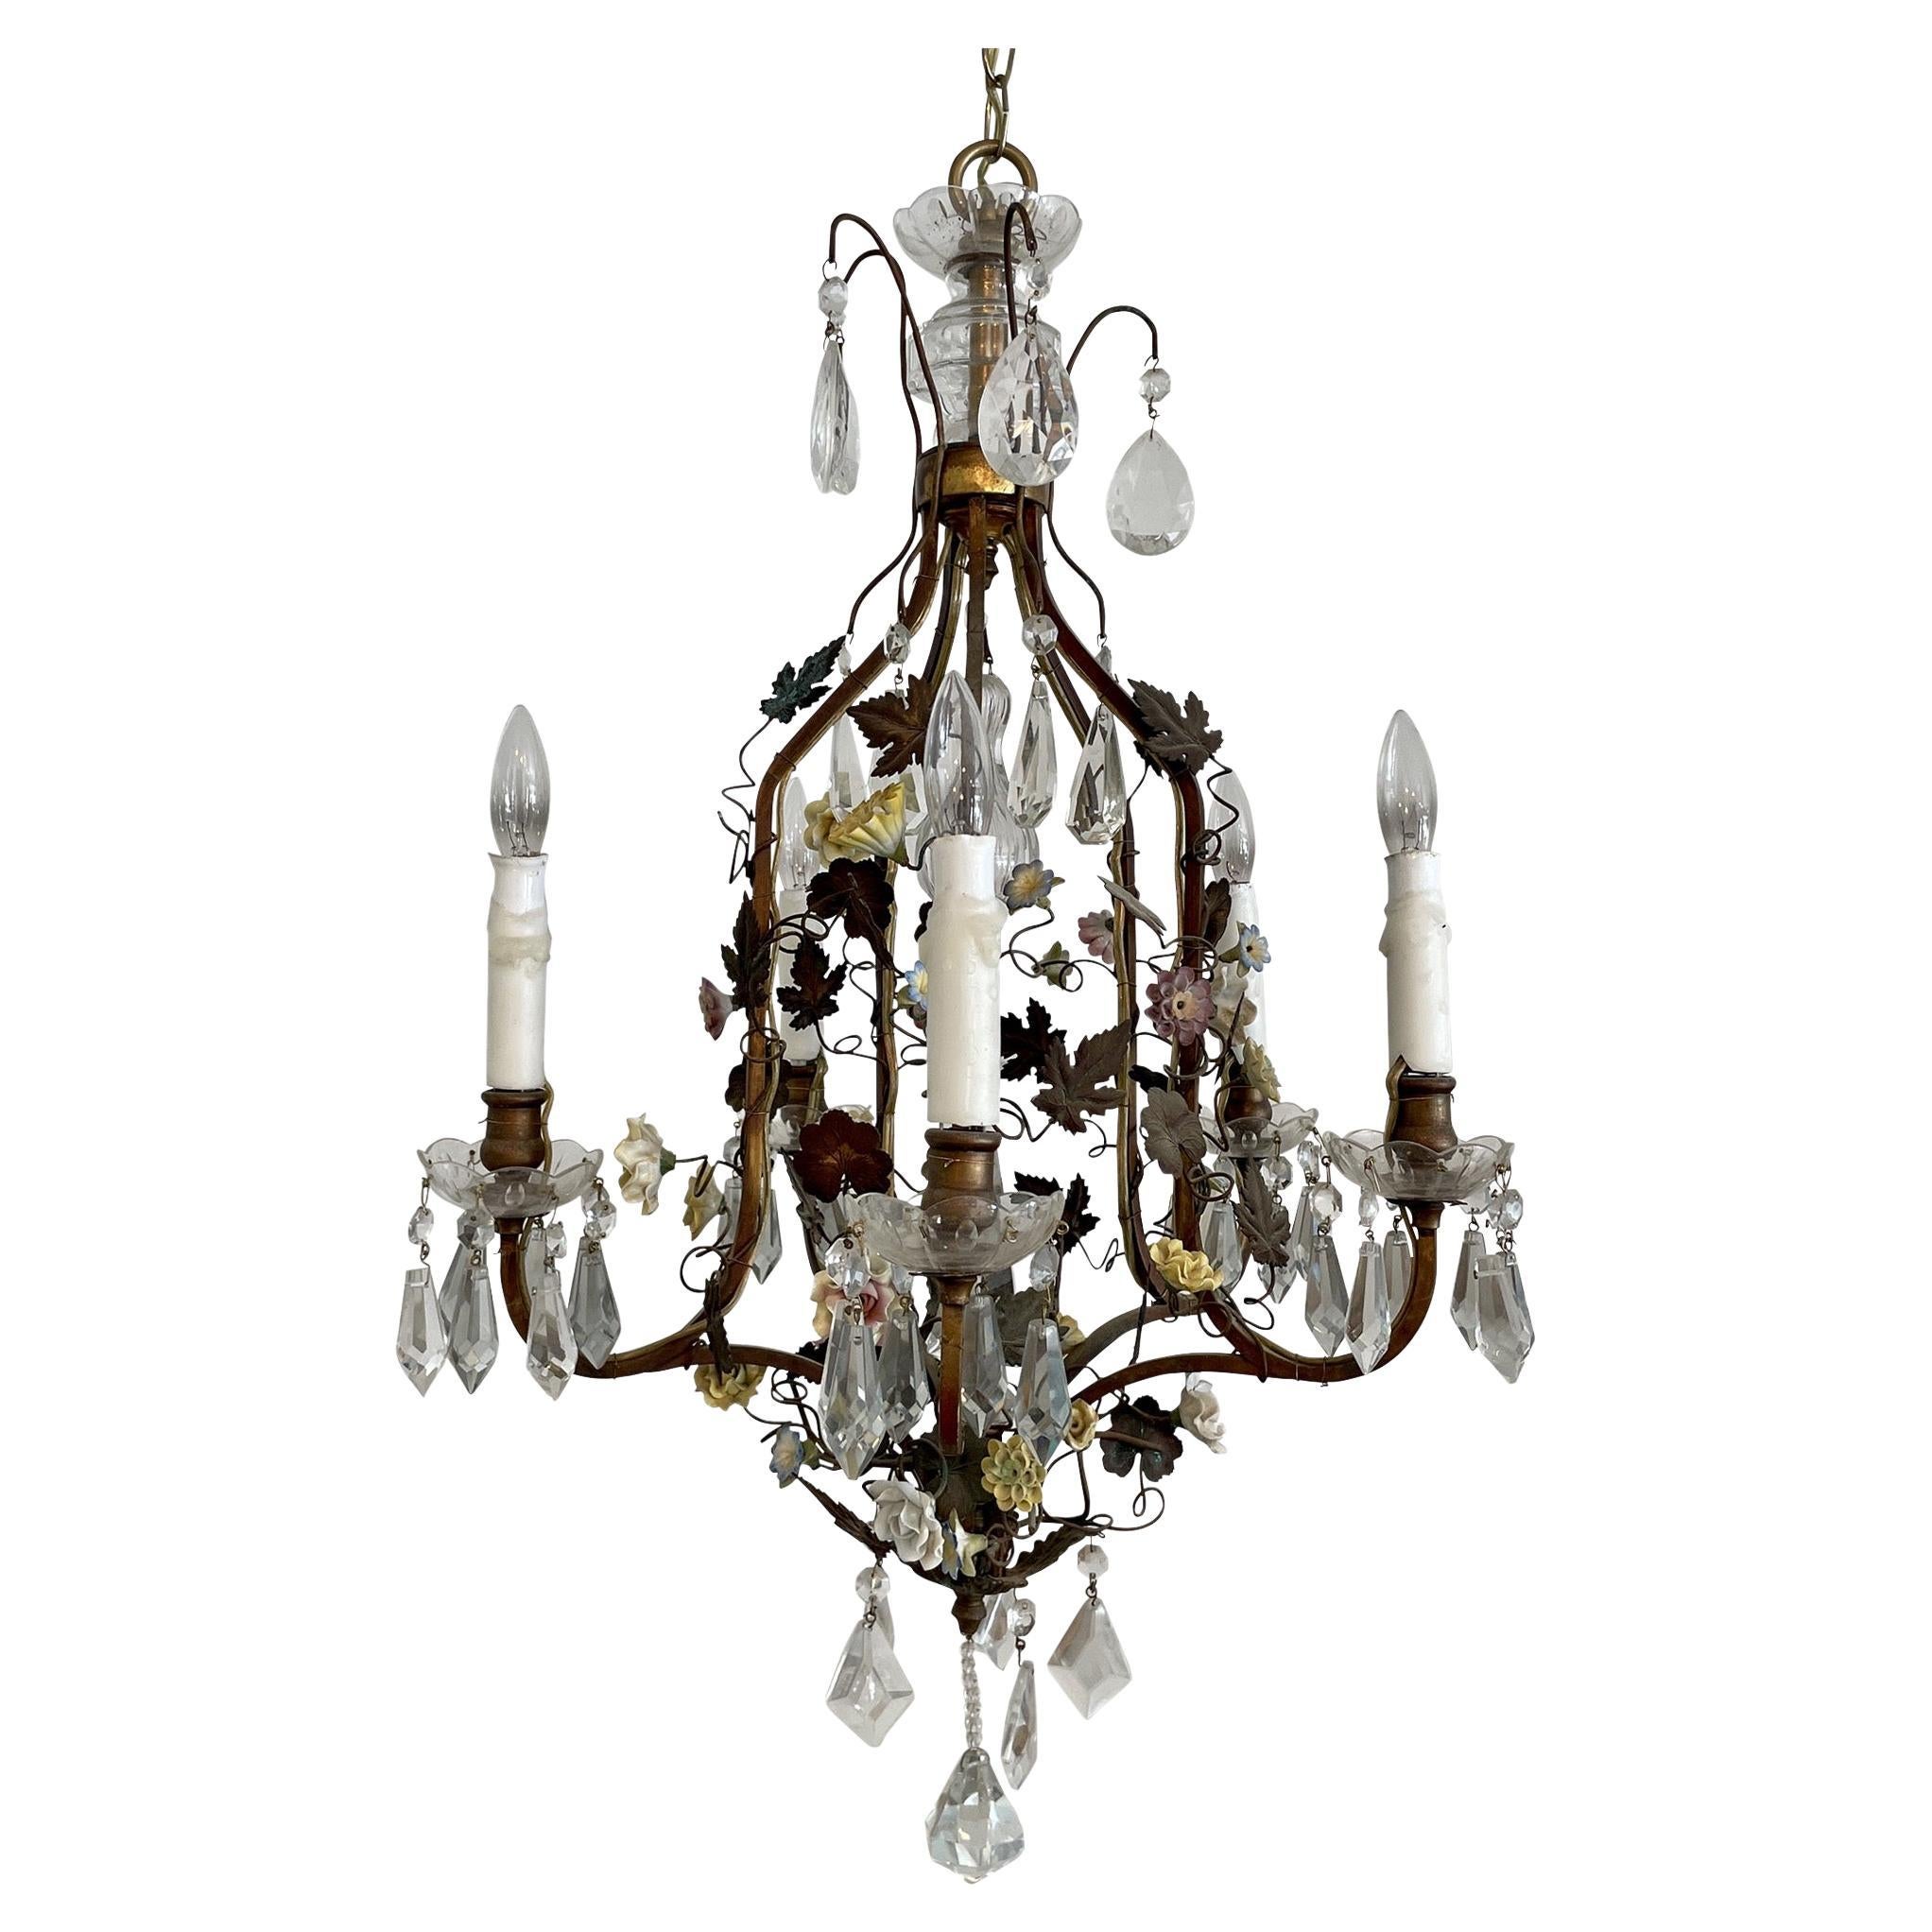 French Tole with Porcelain Flower Details Chandelier